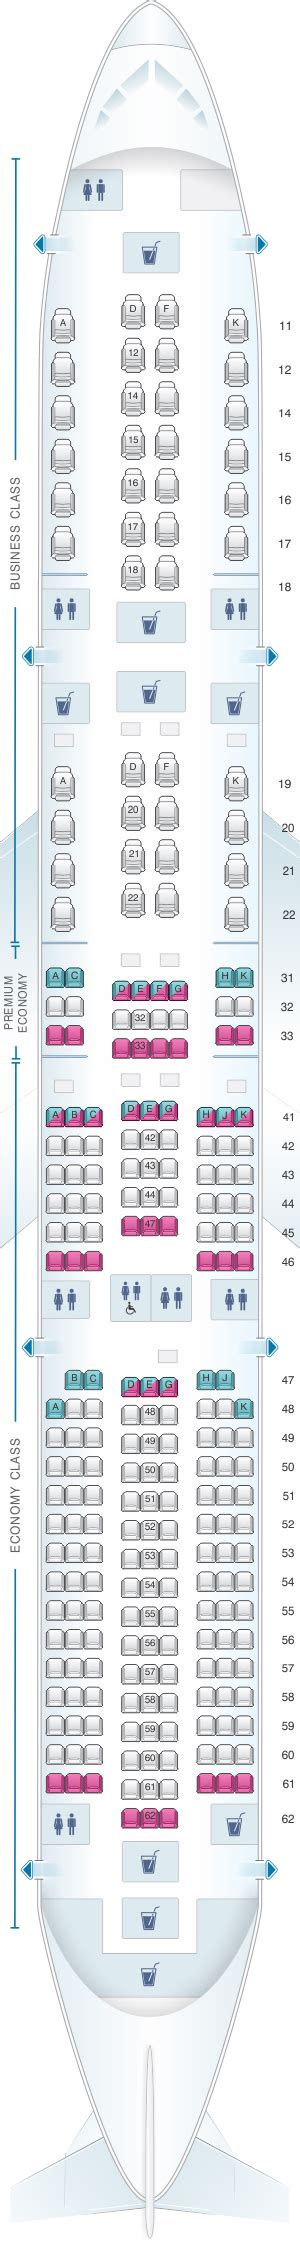 Airbus A350 900 Seating Map Image To U